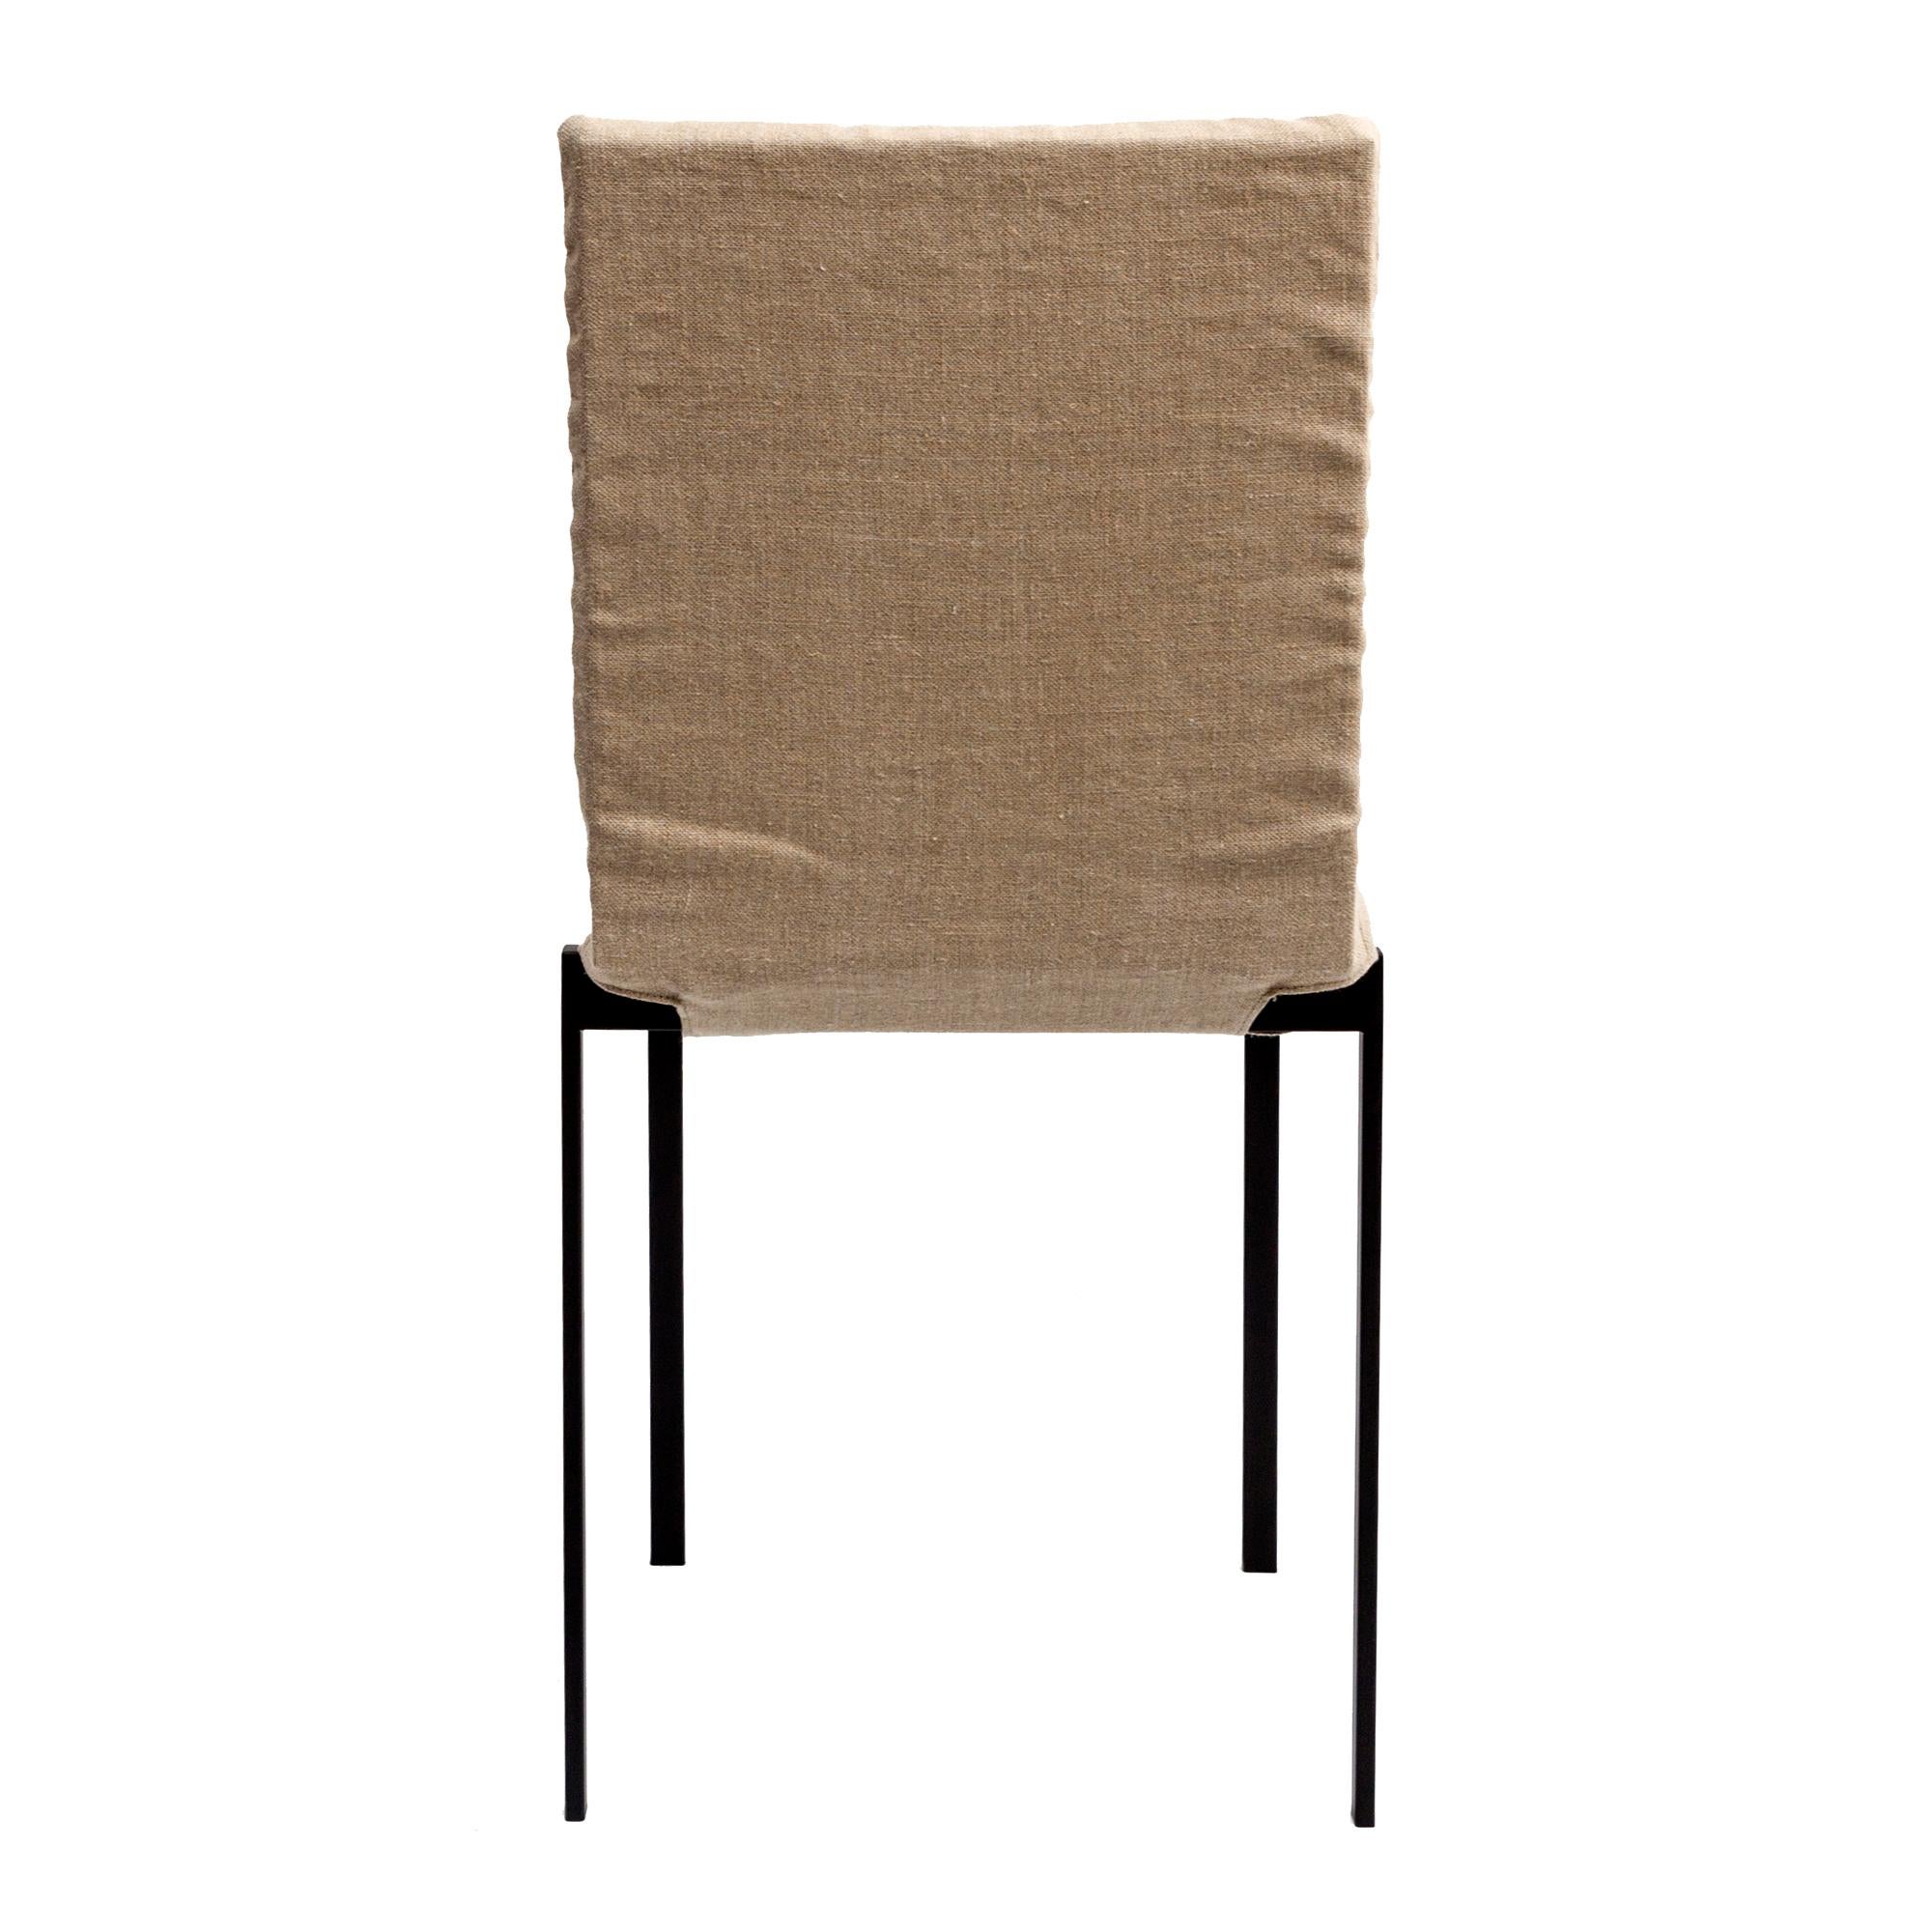 Italian Contemporary Tanit Soft Chair with Beige Linen Cover For Sale